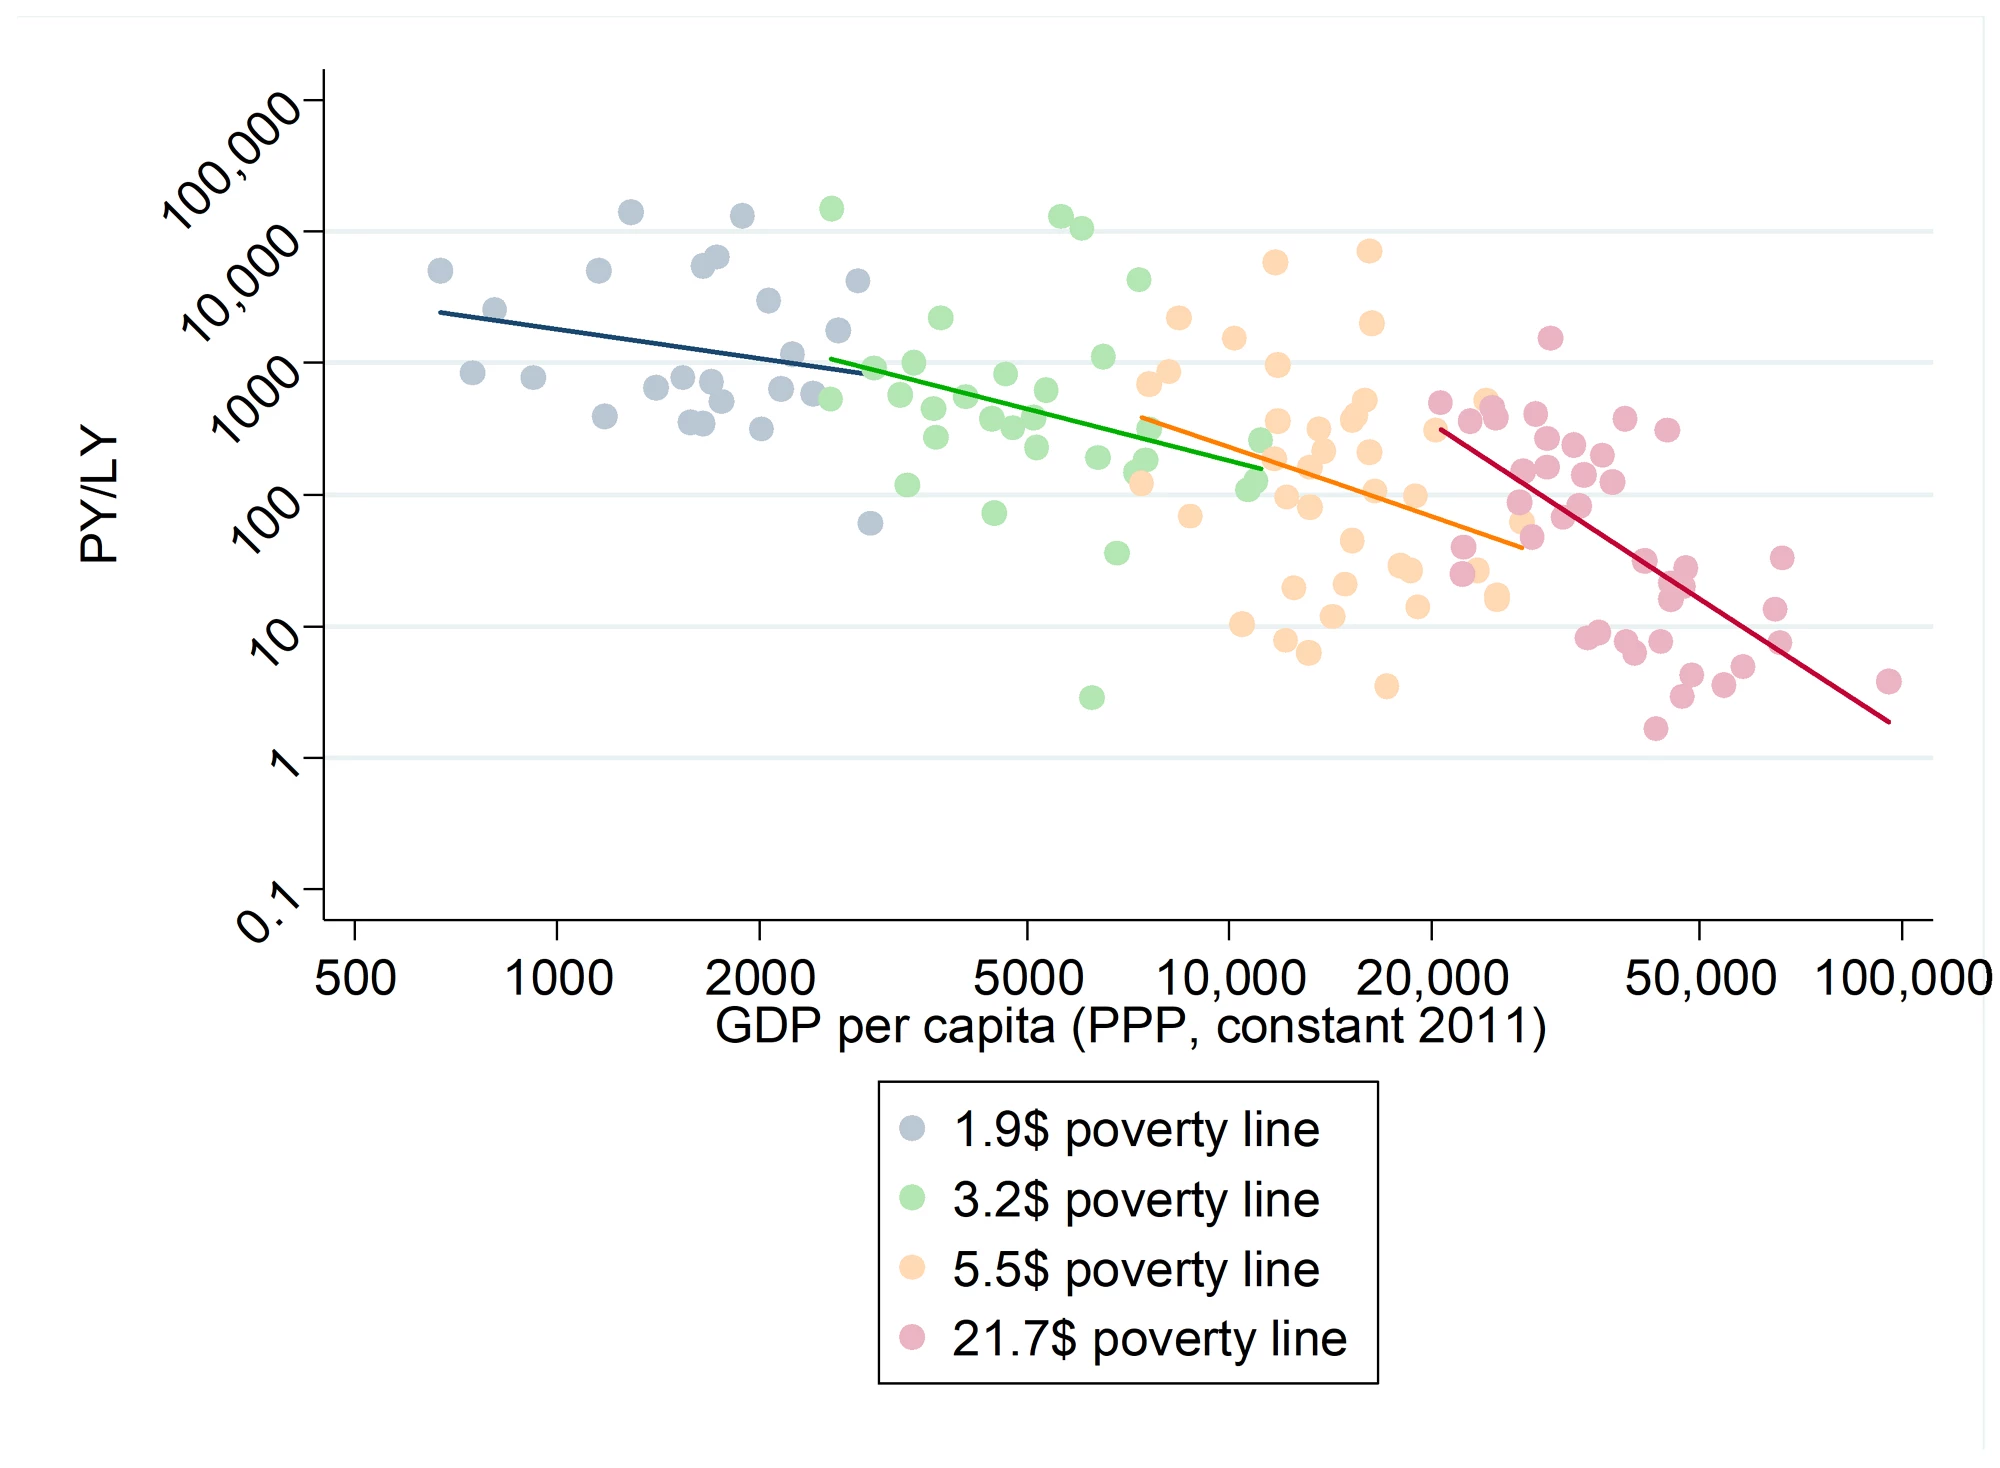 Figure 1: The poverty years/lost years ratios for 150 countries